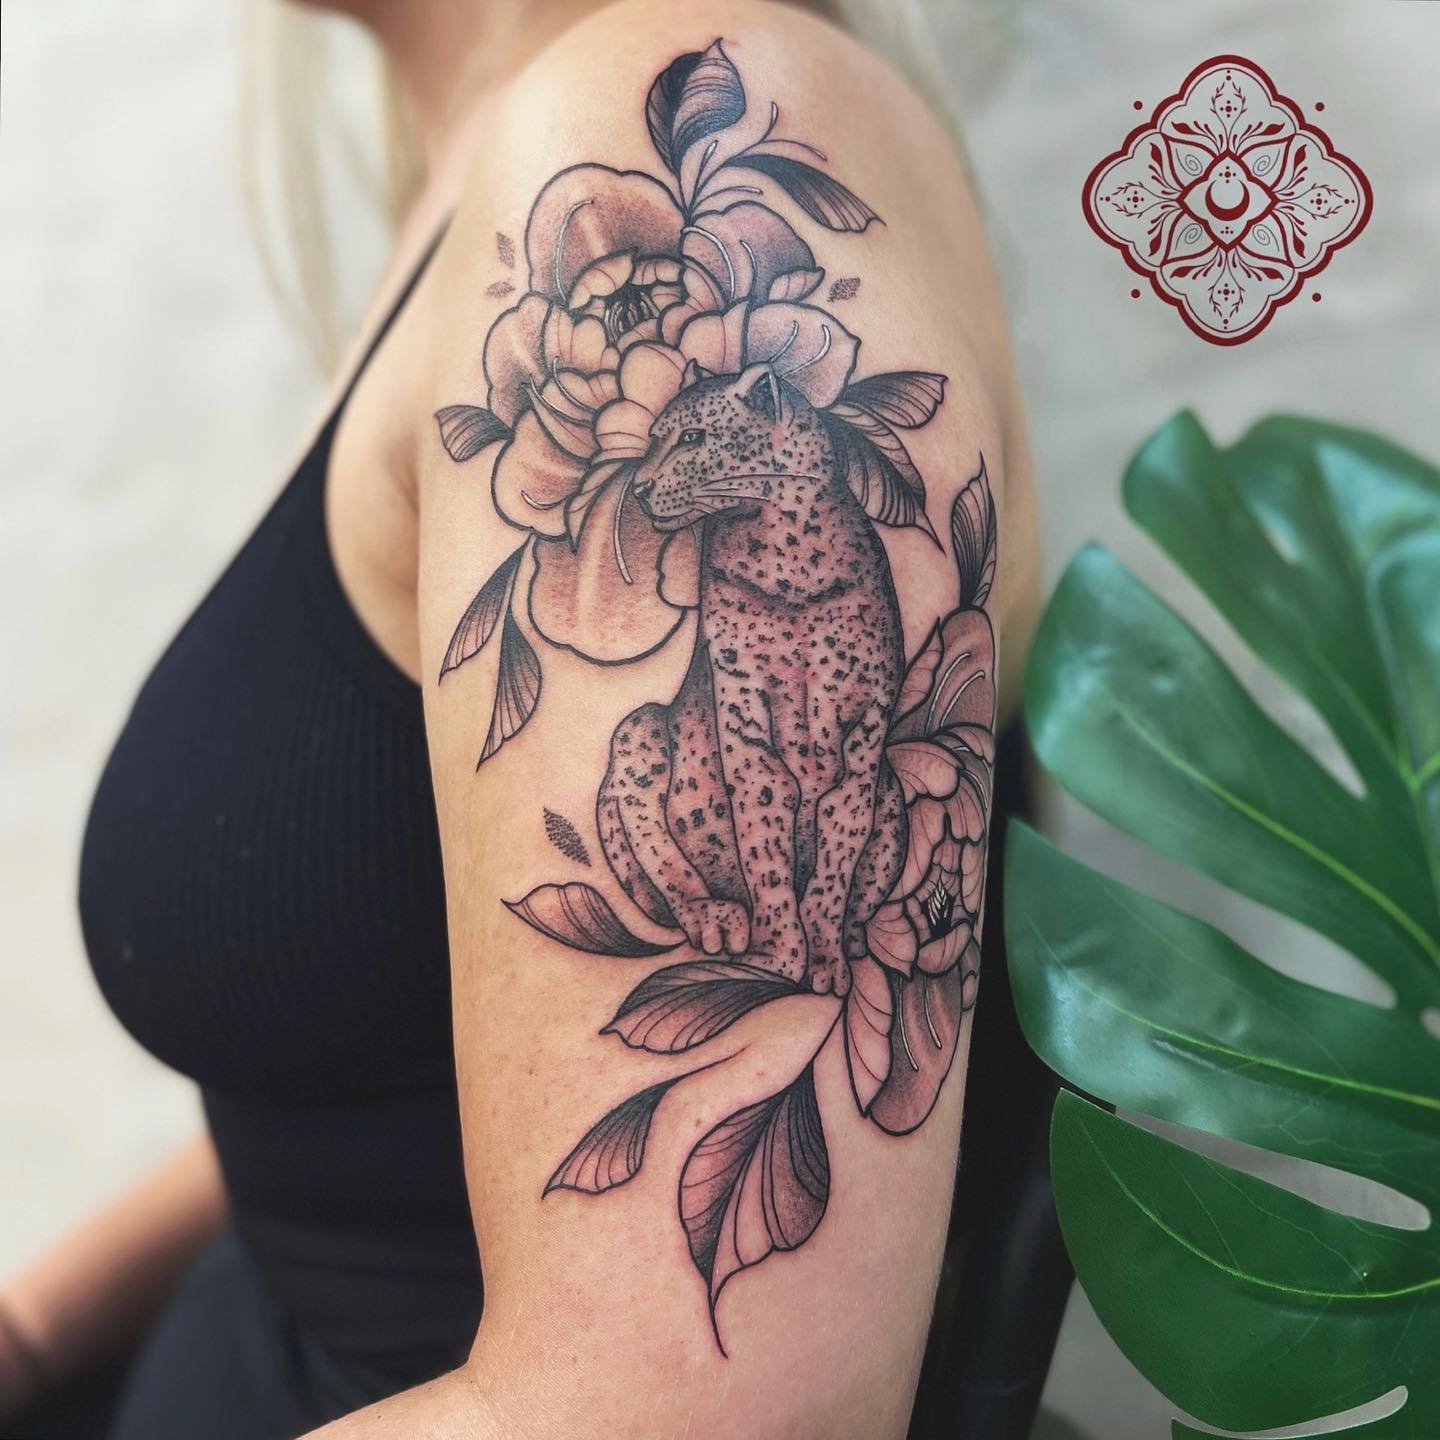 Leopard and Peonies 🐆 Thanks dear Ruth Sibbald! 🤍
Done at studioxiiigallery 
•
•
•
•
•
•
•
•
 a  
            
  